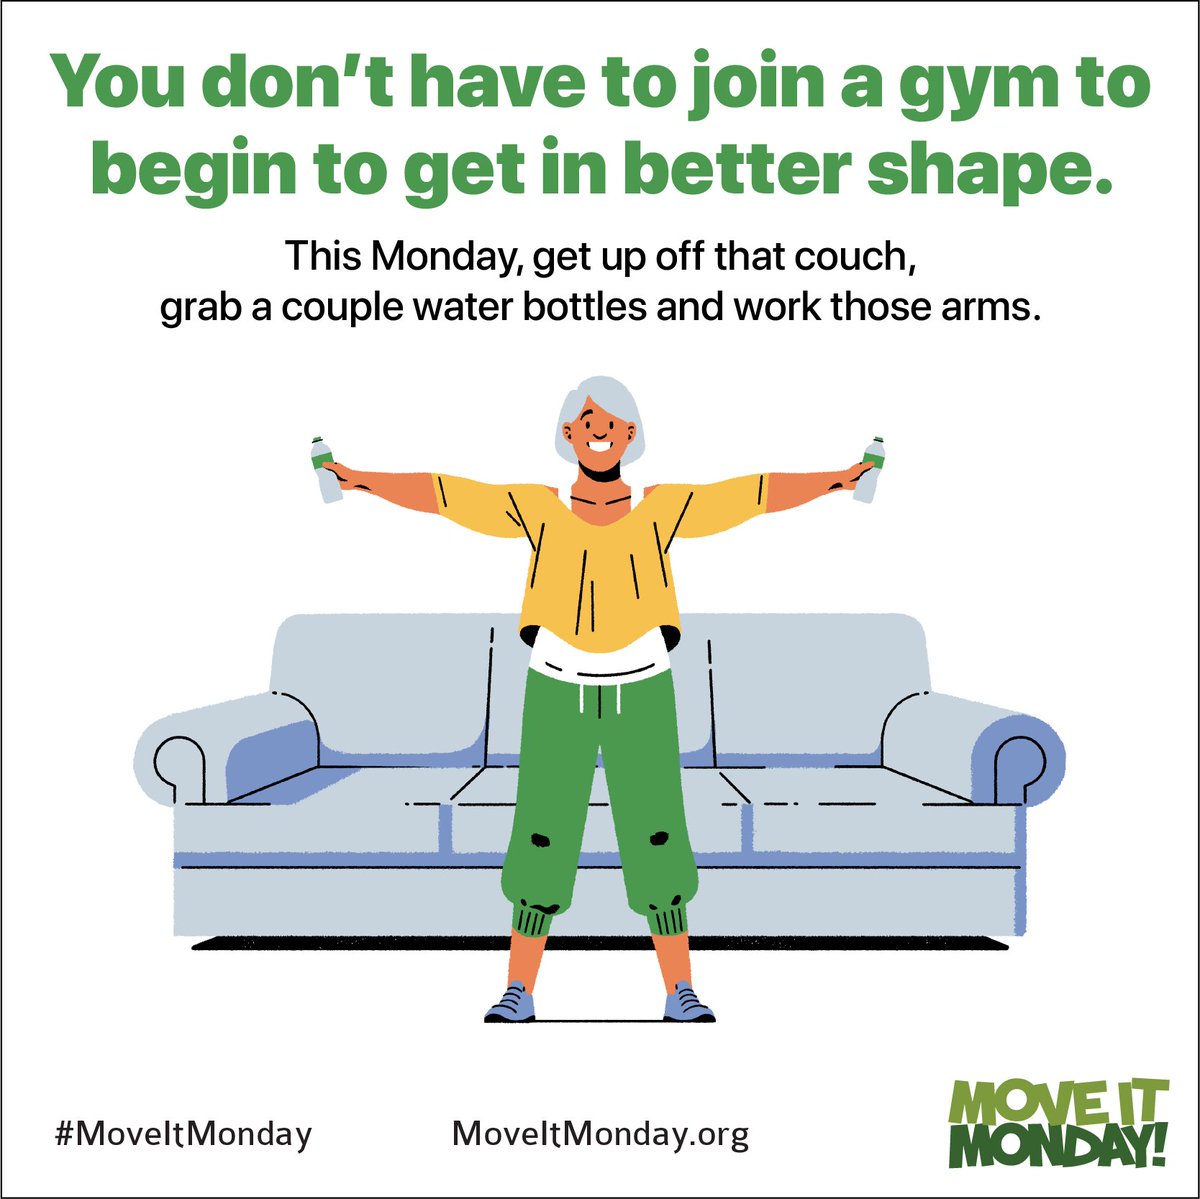 Get creative with your @HealthyMonday exercise regimen today by turning household objects into free weights! Who needs a gym when you've got soup cans? ow.ly/g7K050RhaUz